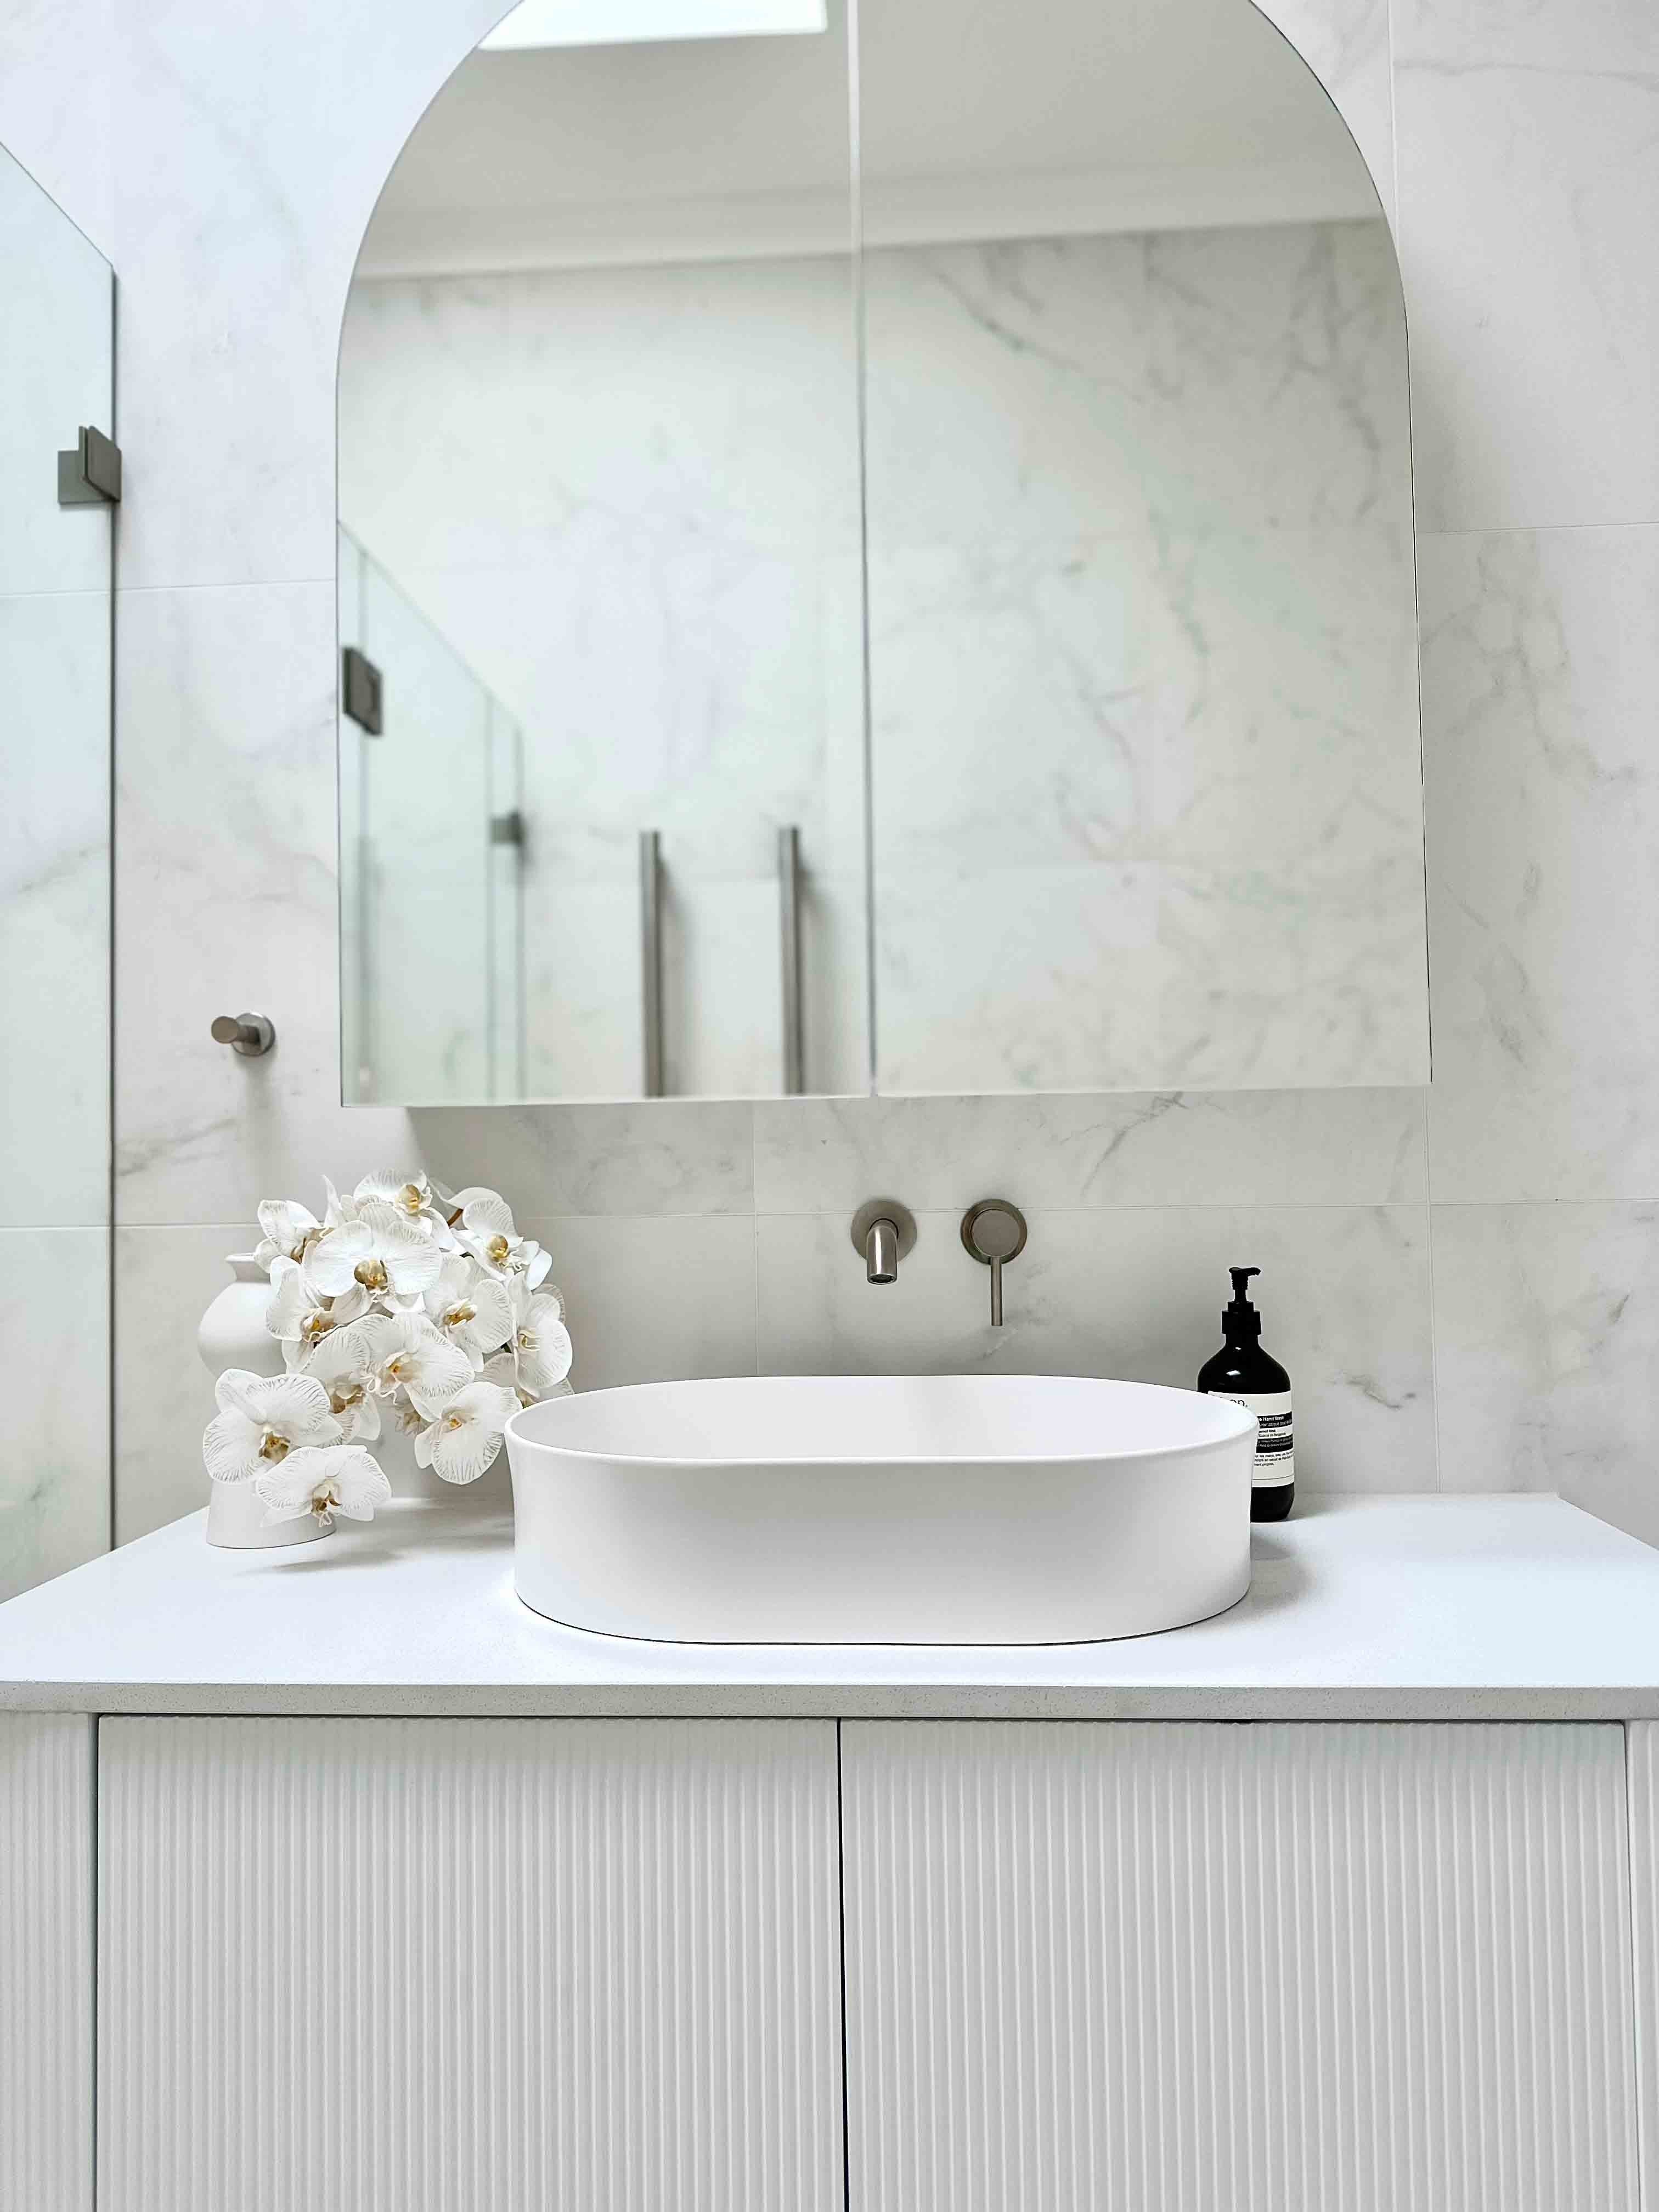 TURNER HASTINGS FINO OVAL ABOVE COUNTER FIRECLAY BASIN MATTE WHITE 549MM